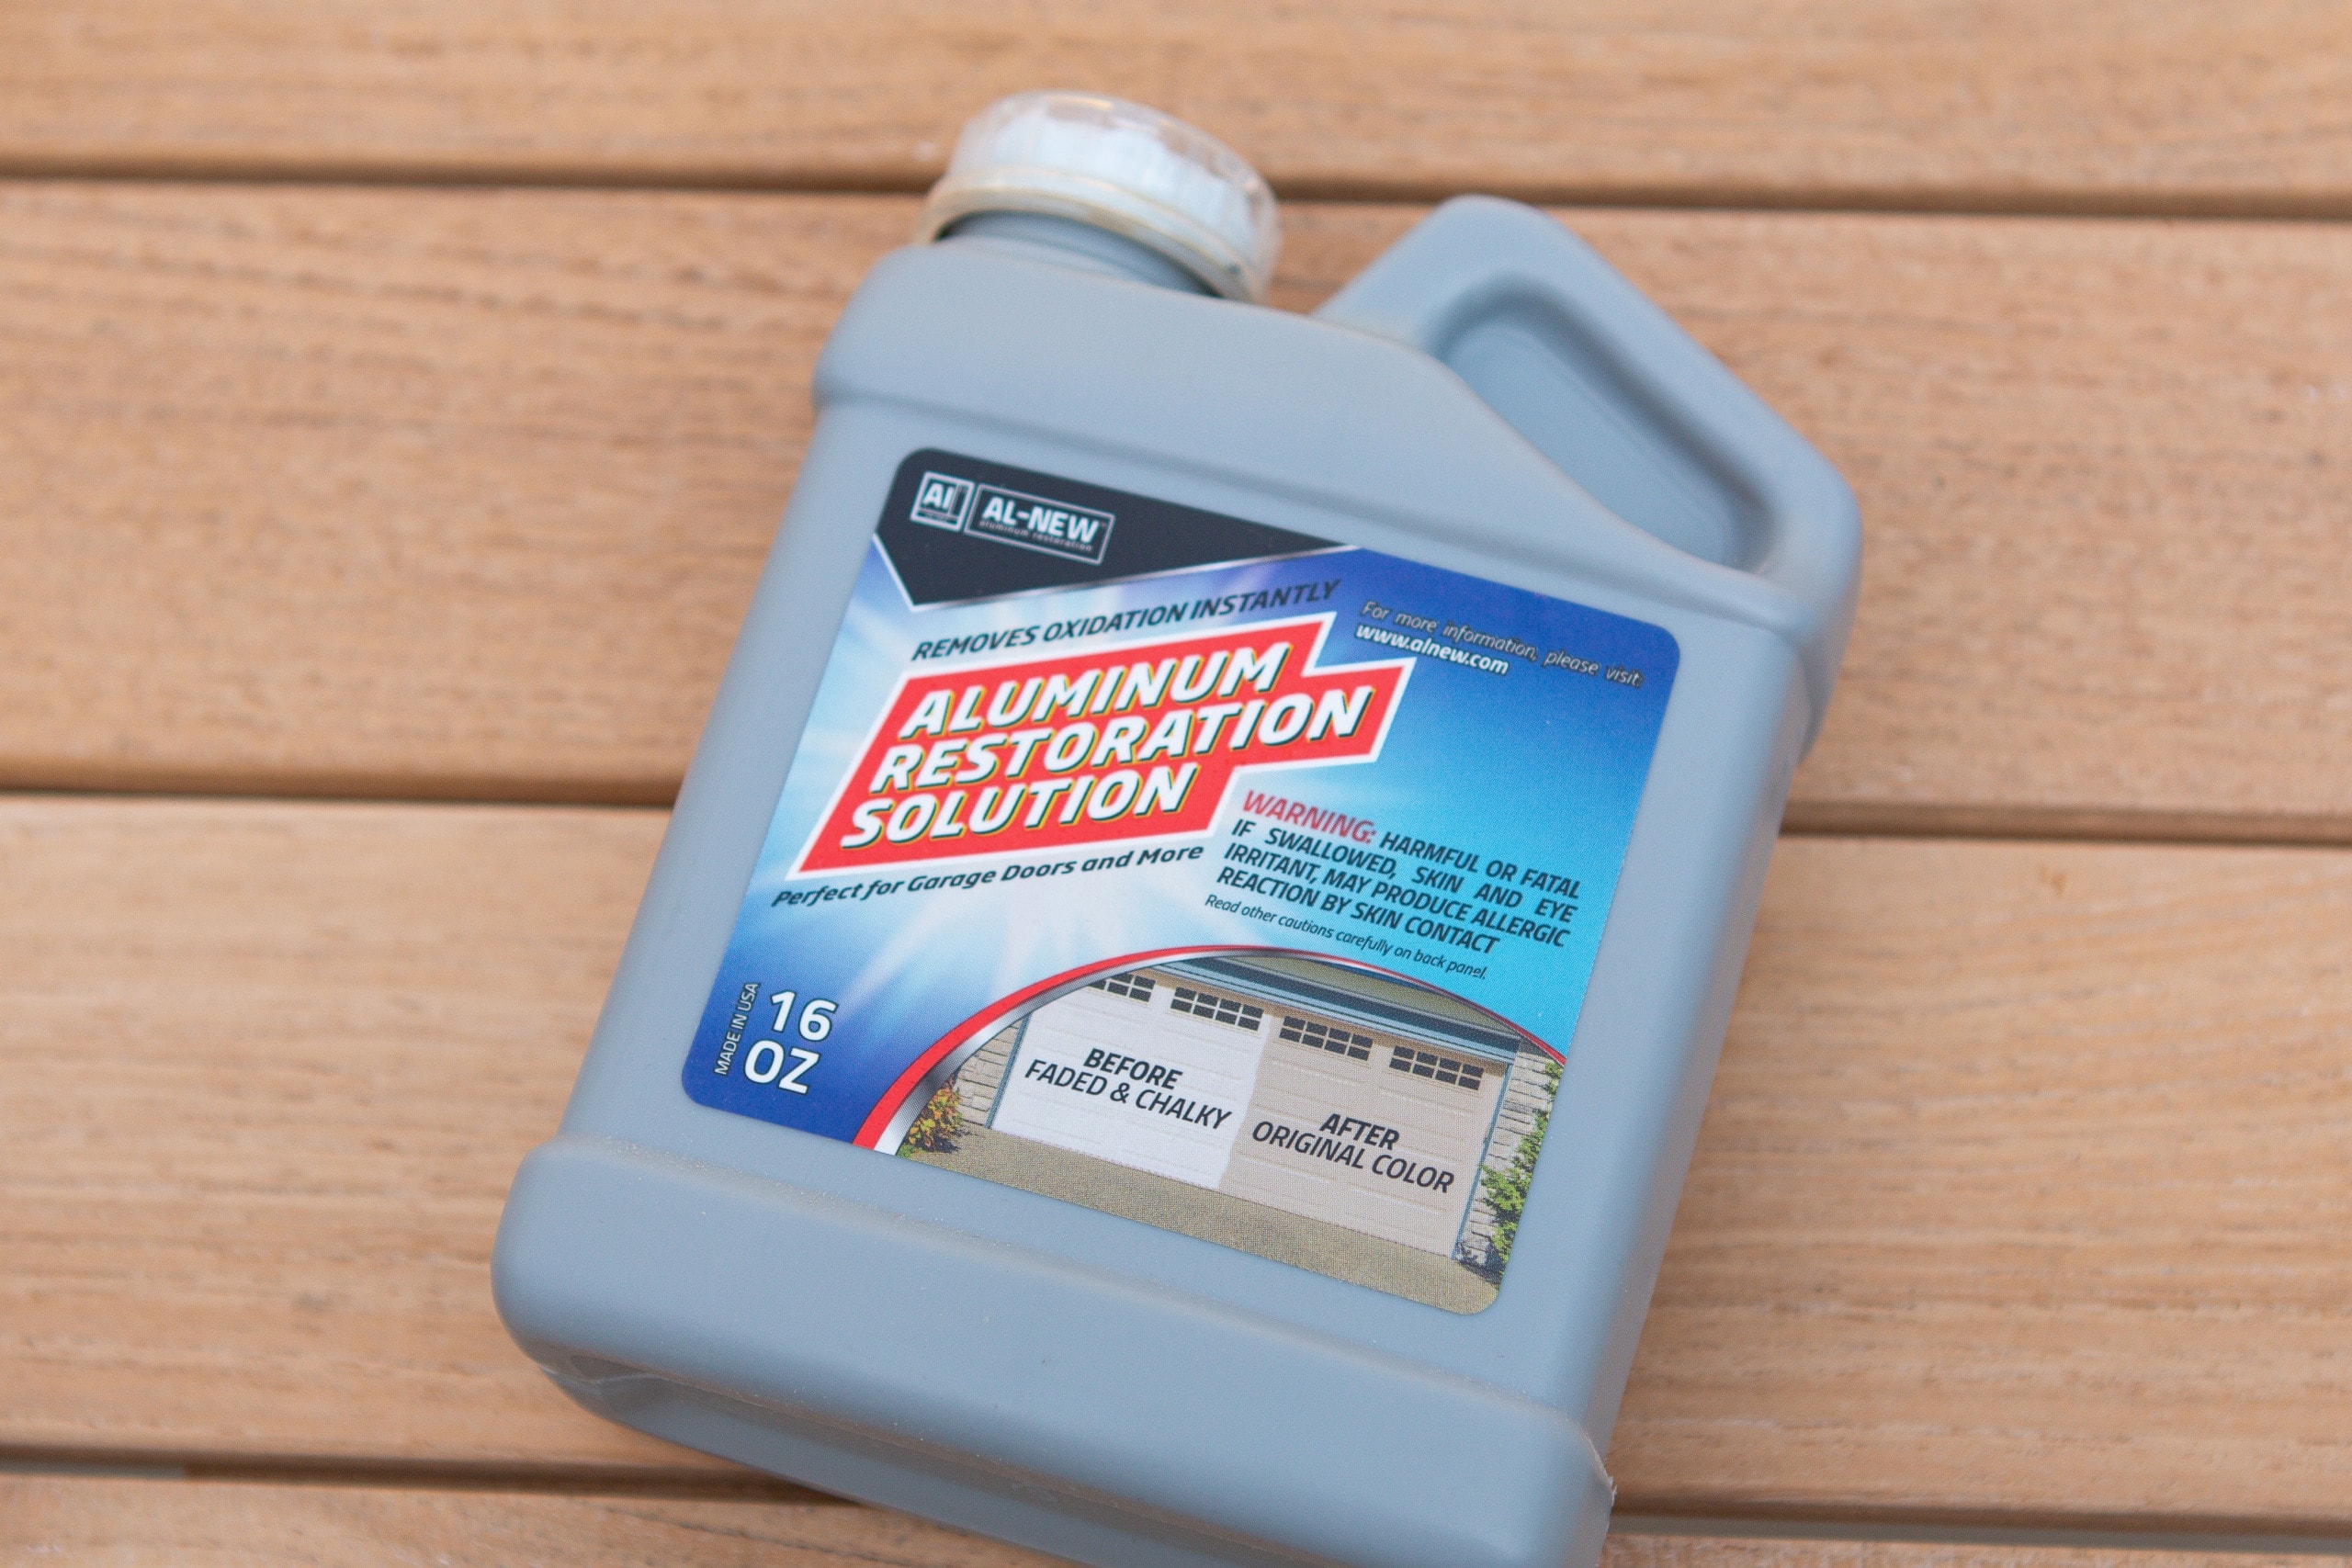 Aluminum cleaner for your grill